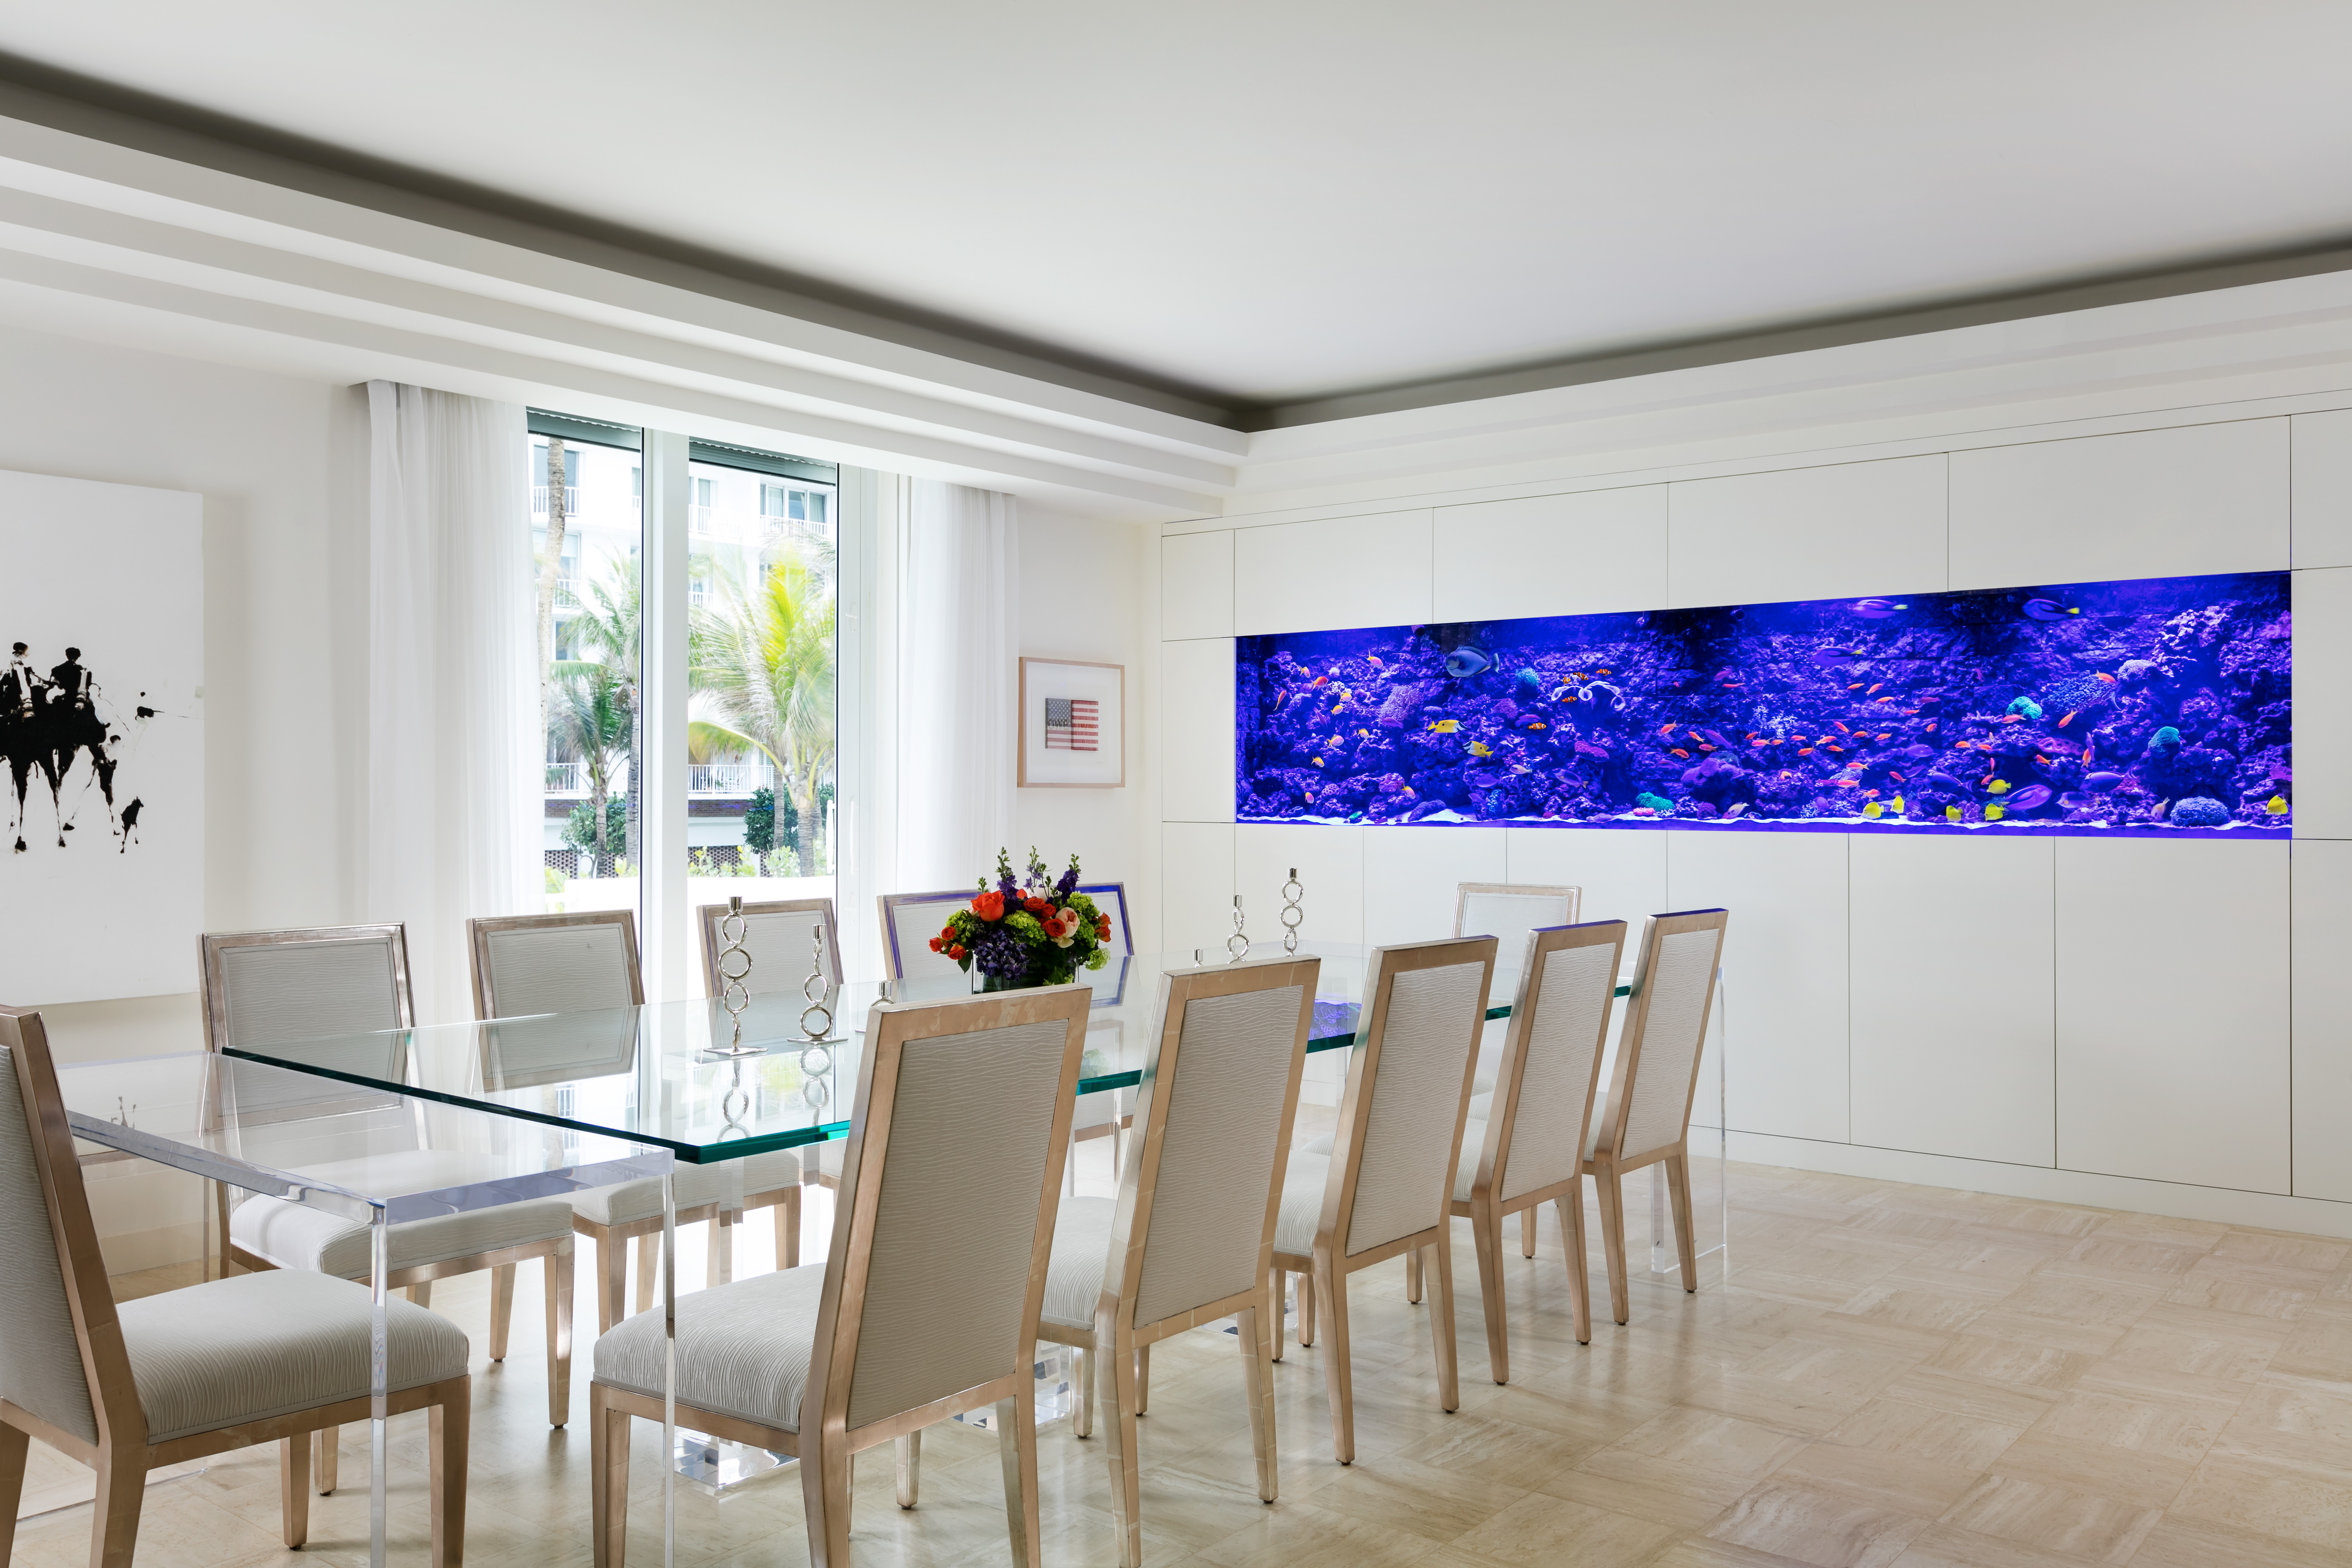 Aquariums Reef Aquaria Designreef Aquaria Design Every Great Room Deserves A Great Aquarium,Sausage Gravy Pizza